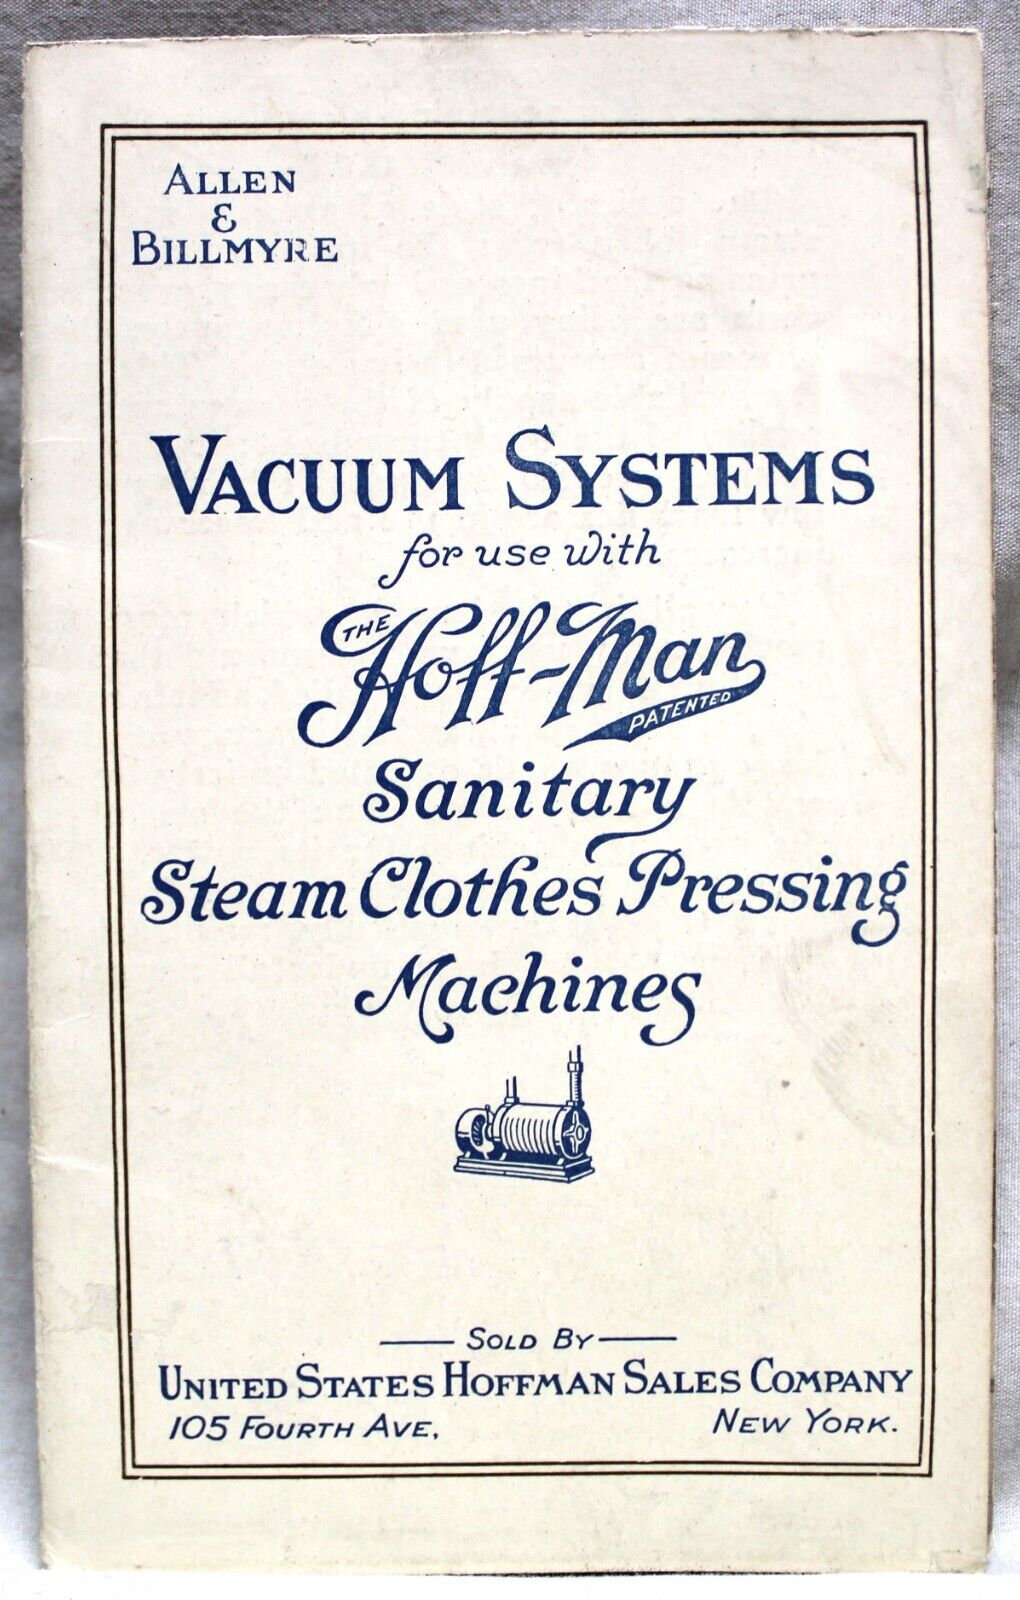 HOFFMAN POWER STEAM CLOTHING PRESS MACHINE ADVERTISING BROCHURE ABOUT 1920